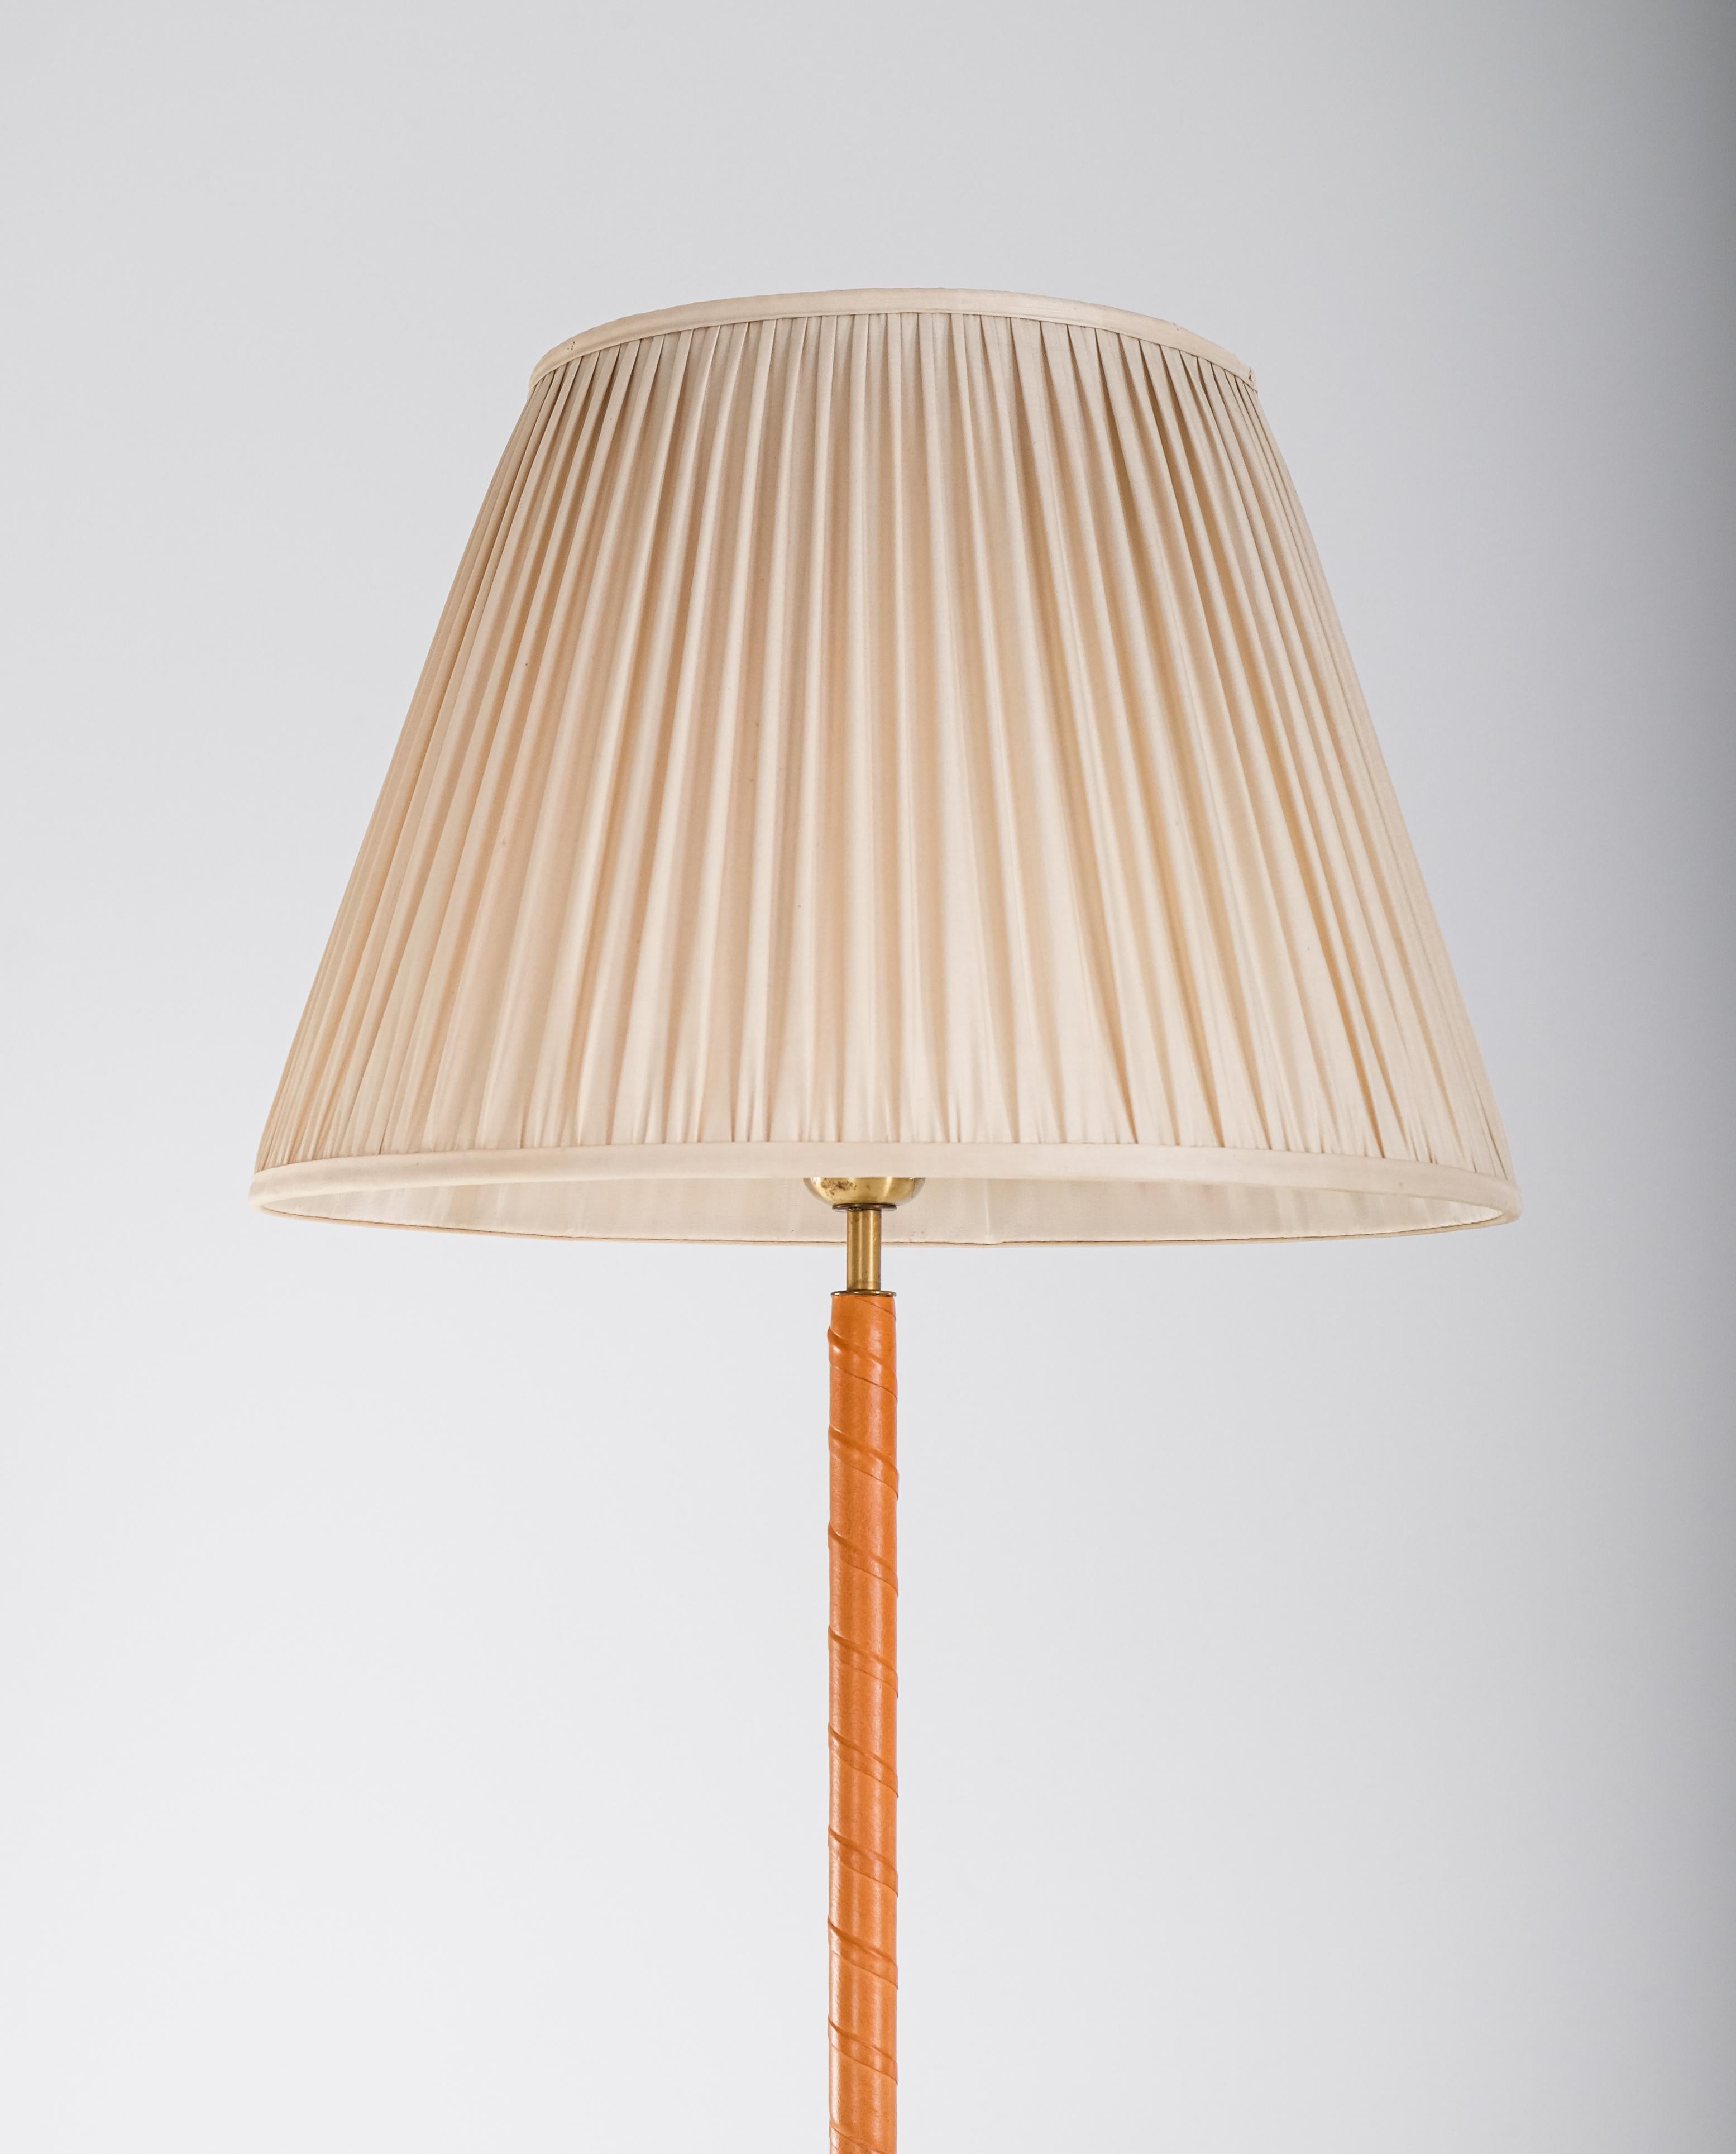 Swedish Brass & Leather Floor Lamps, Sweden, 1950s For Sale